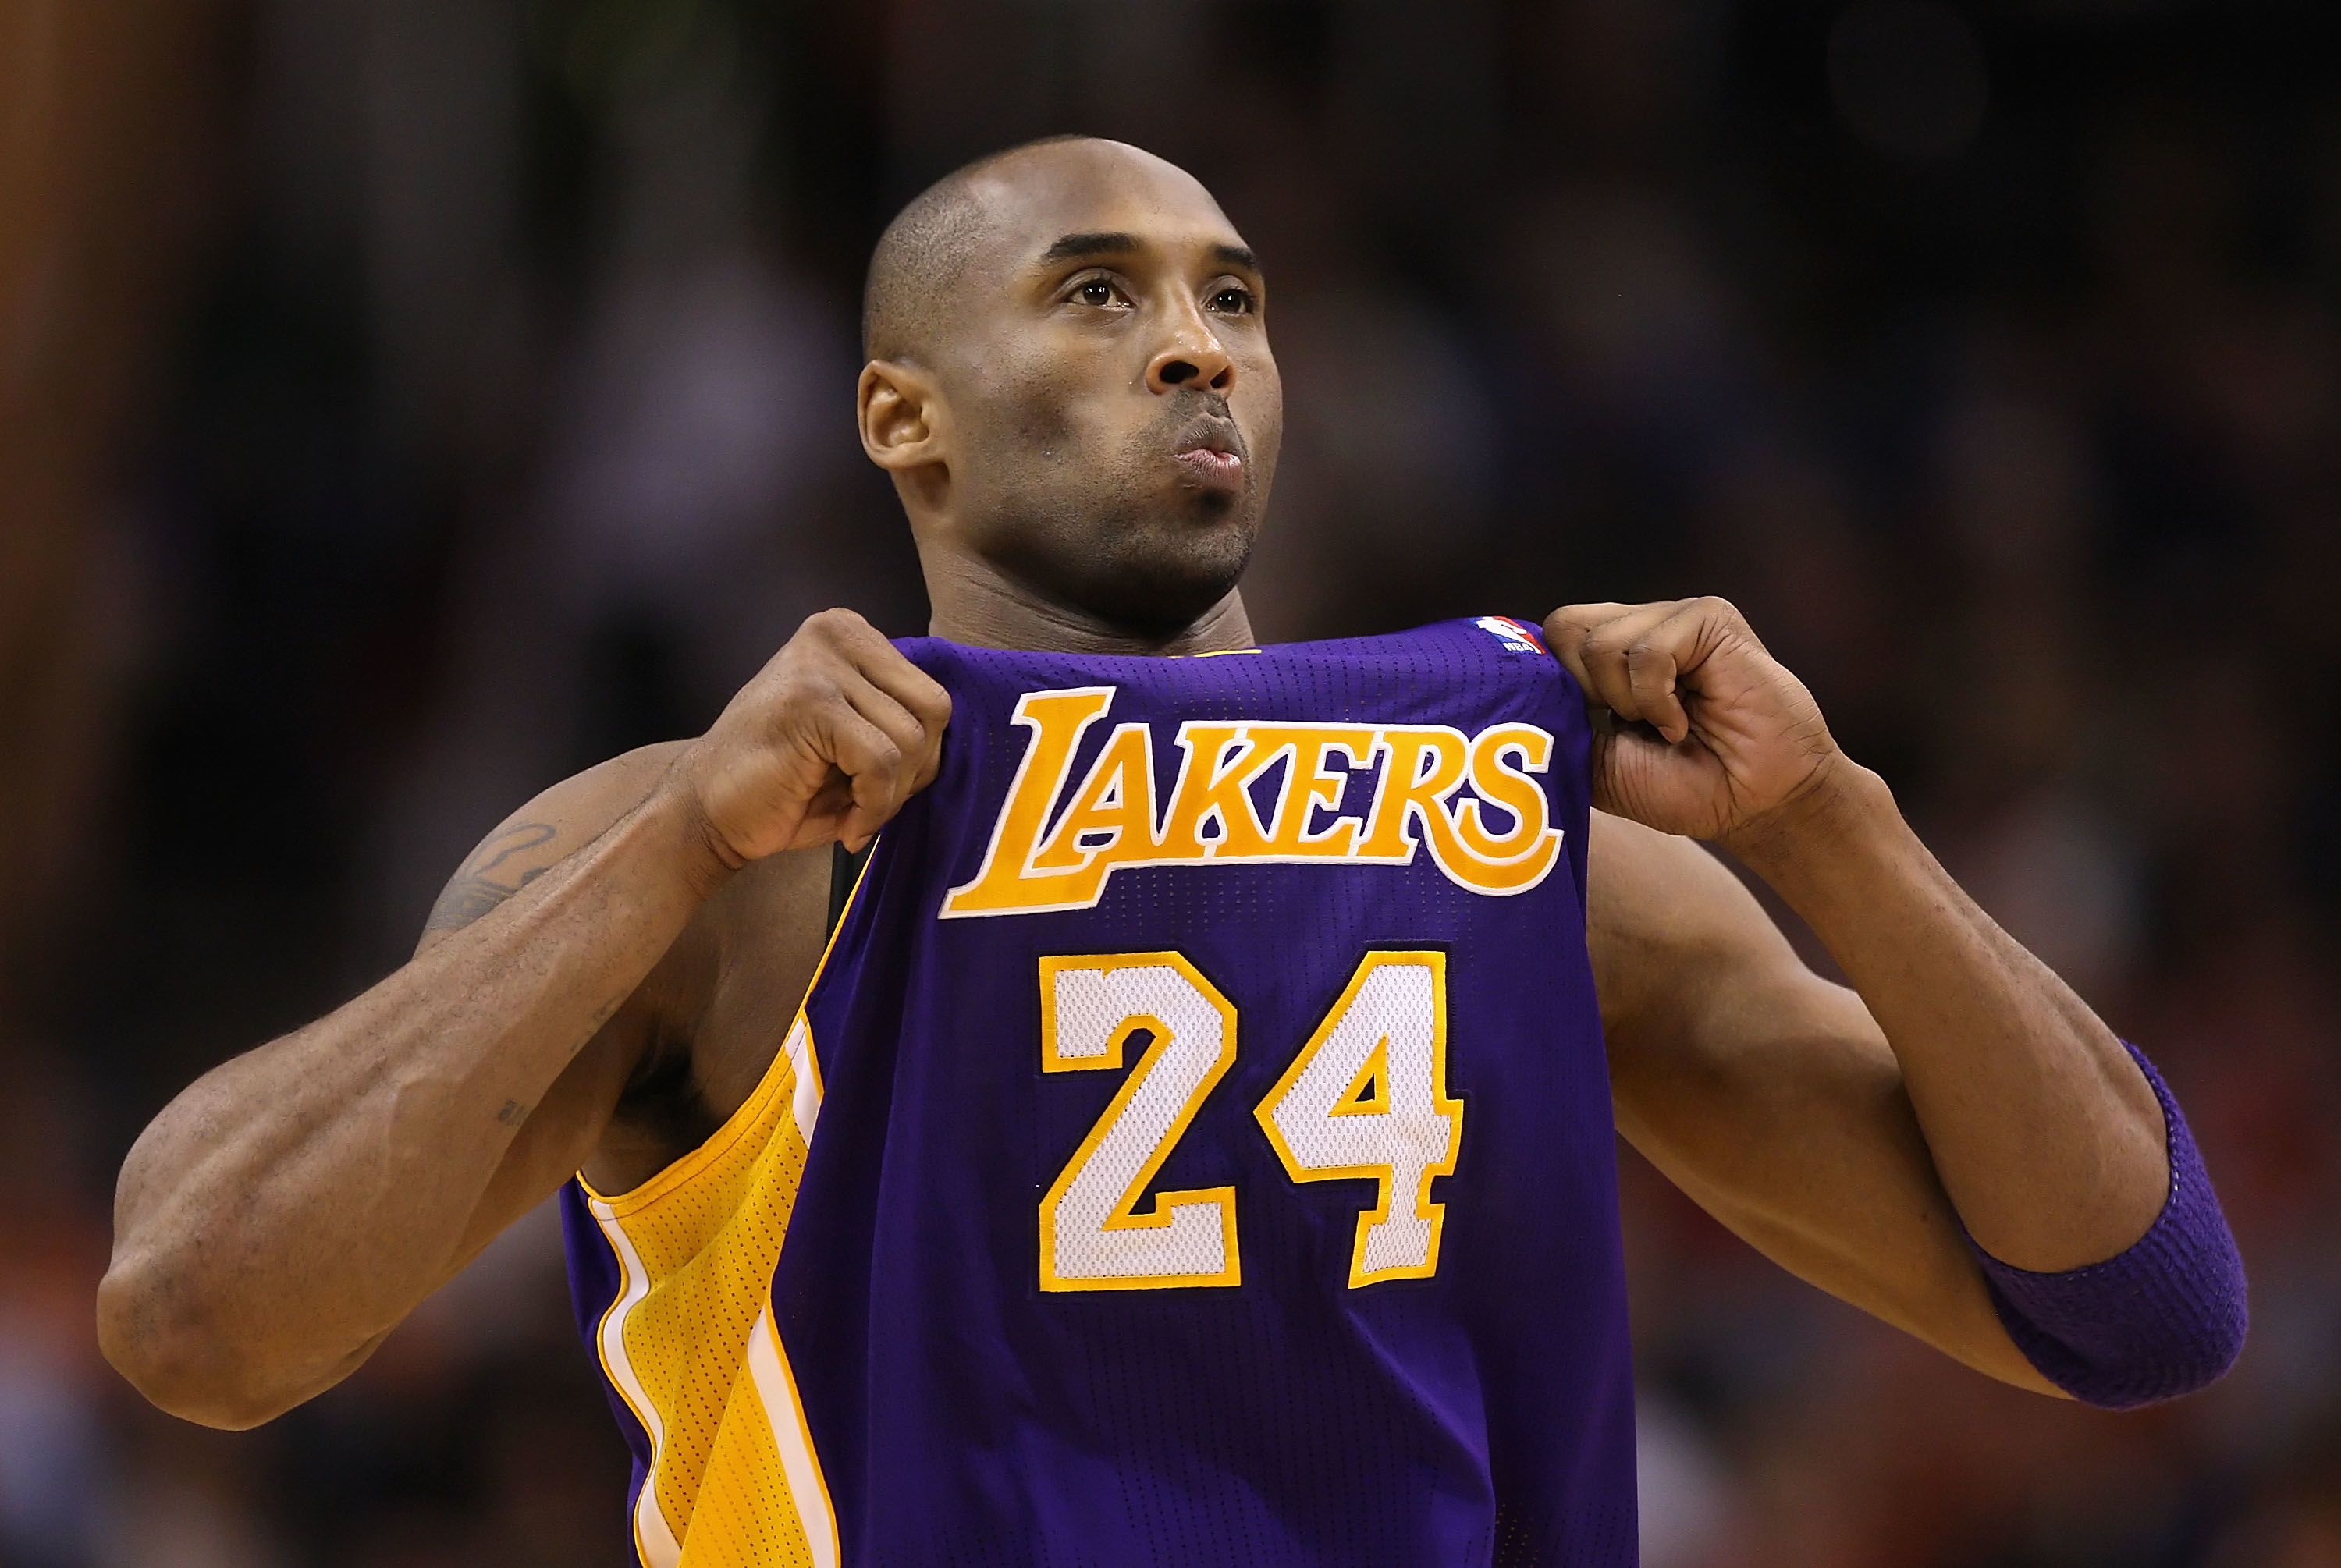 See Kobe Bryant's Career in Pictures